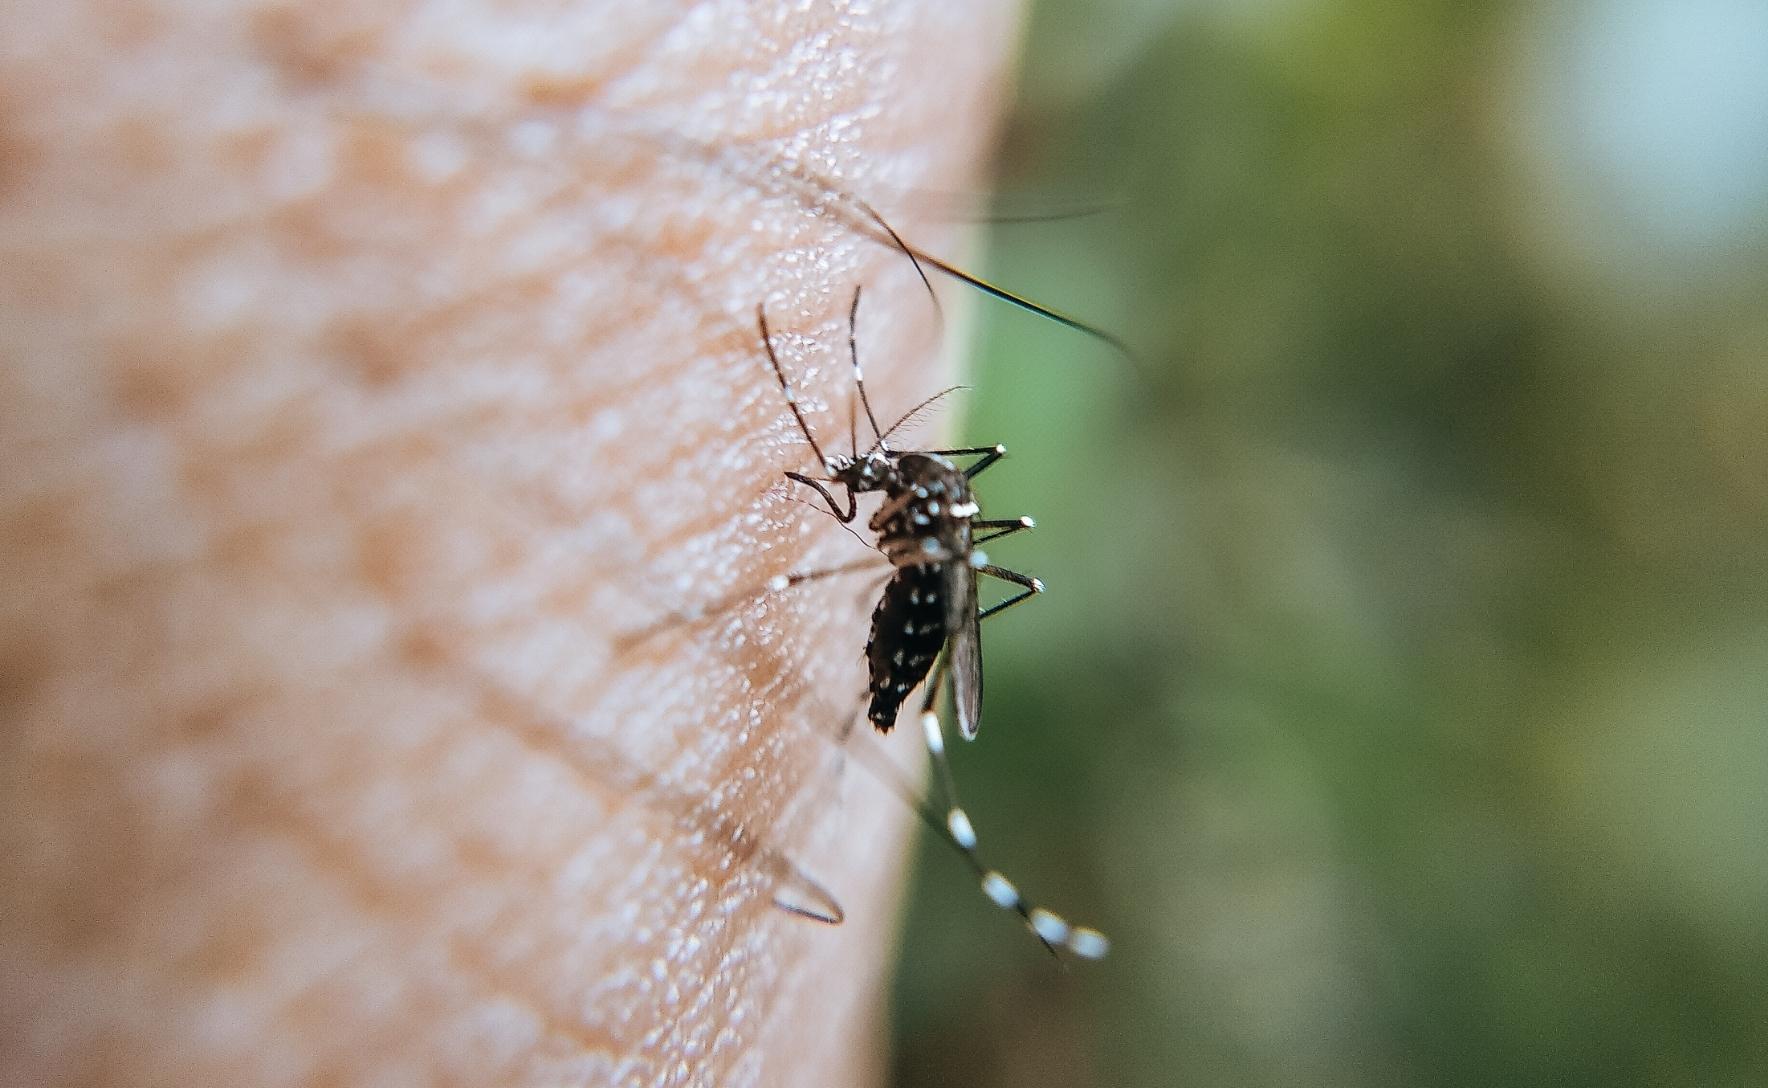 close up of a mosquito resting on a human's skin in front of a green blurred background